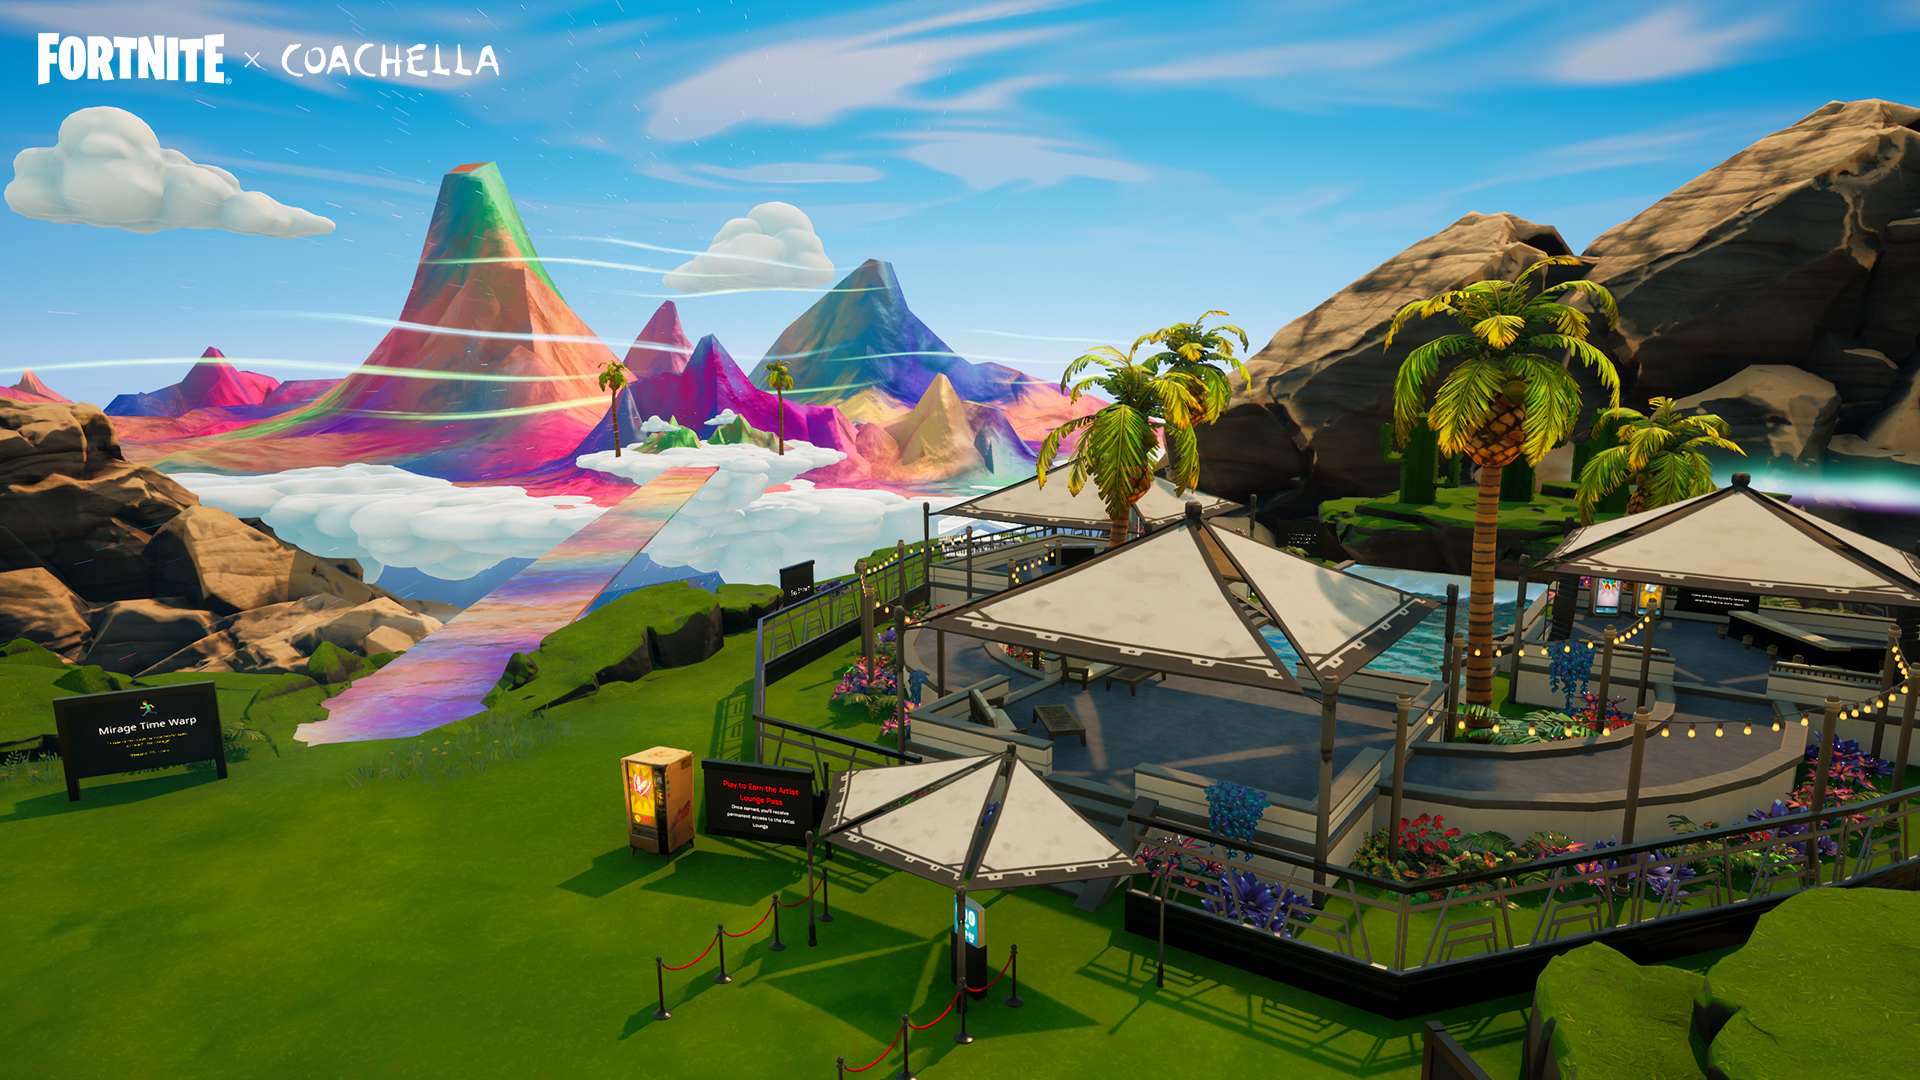 Fortnite celebrates Coachella once again with new skins and quests